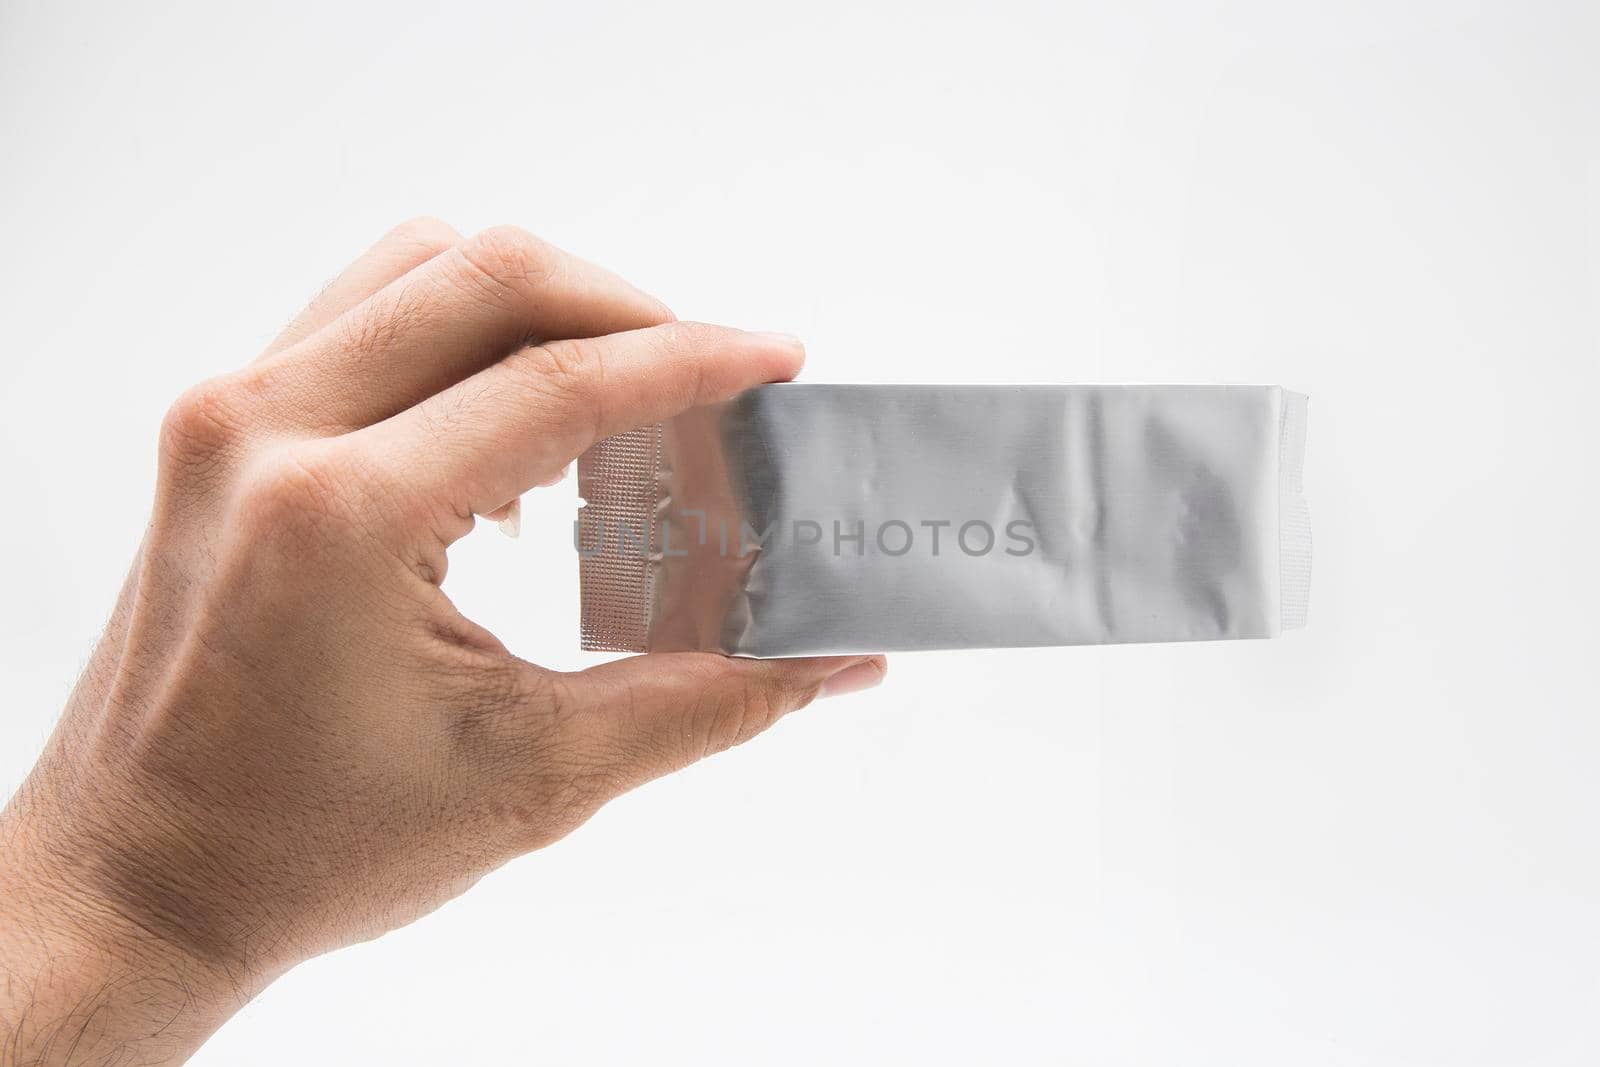 Foil bag package isolated on white background by titipong